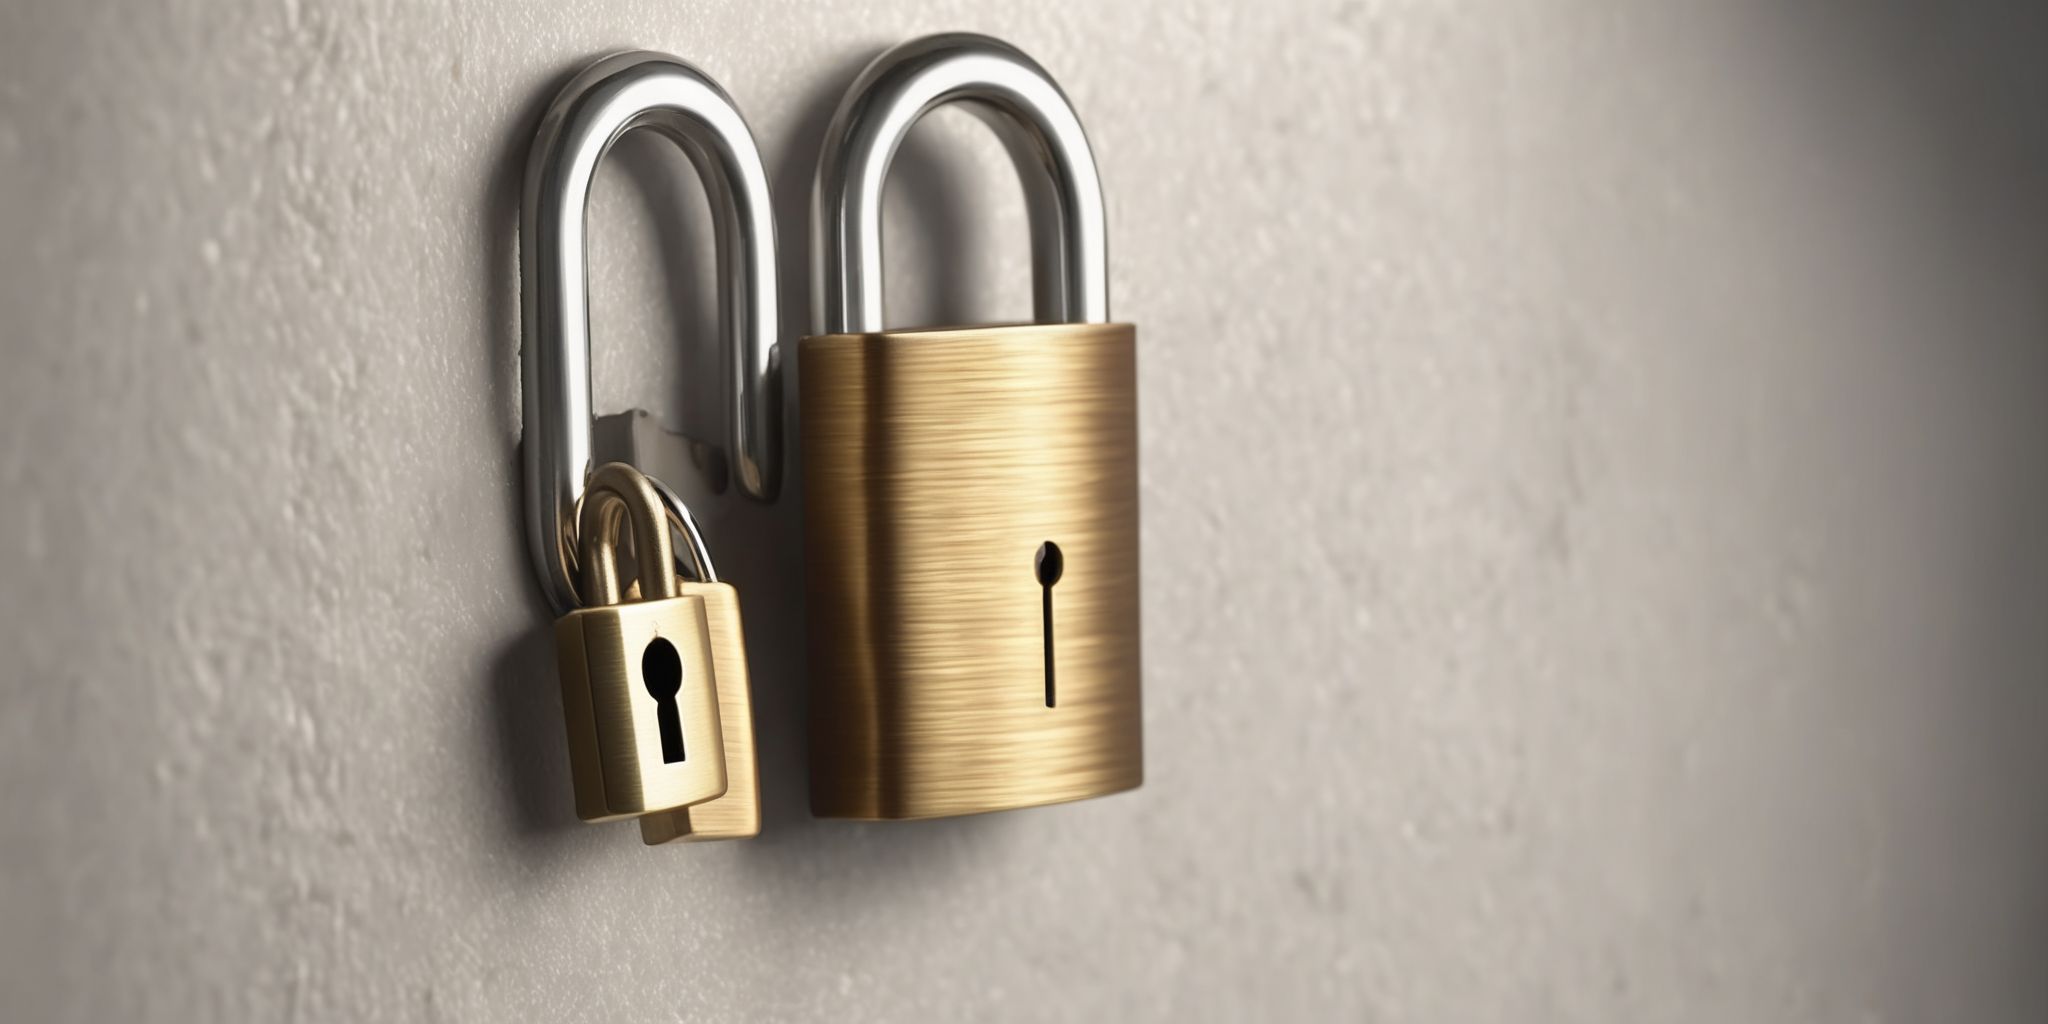 Lock and key  in realistic, photographic style